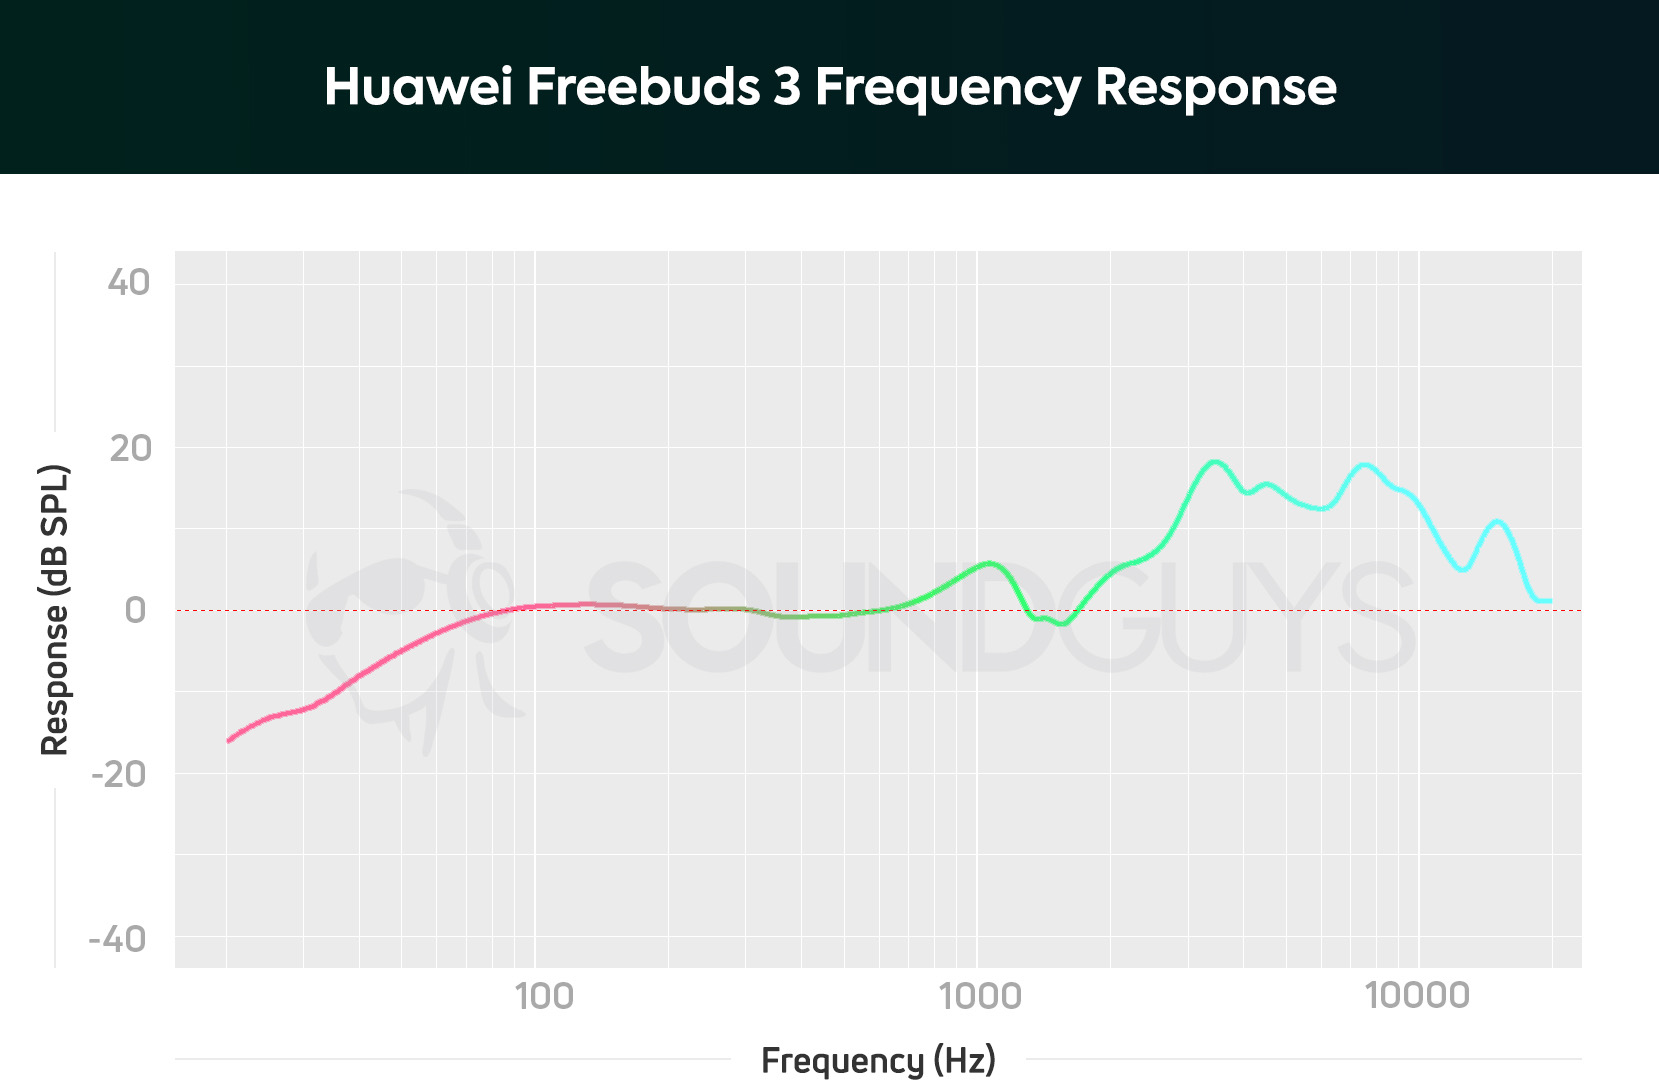 Graph showing the frequency response of the Huawei Freebuds 3